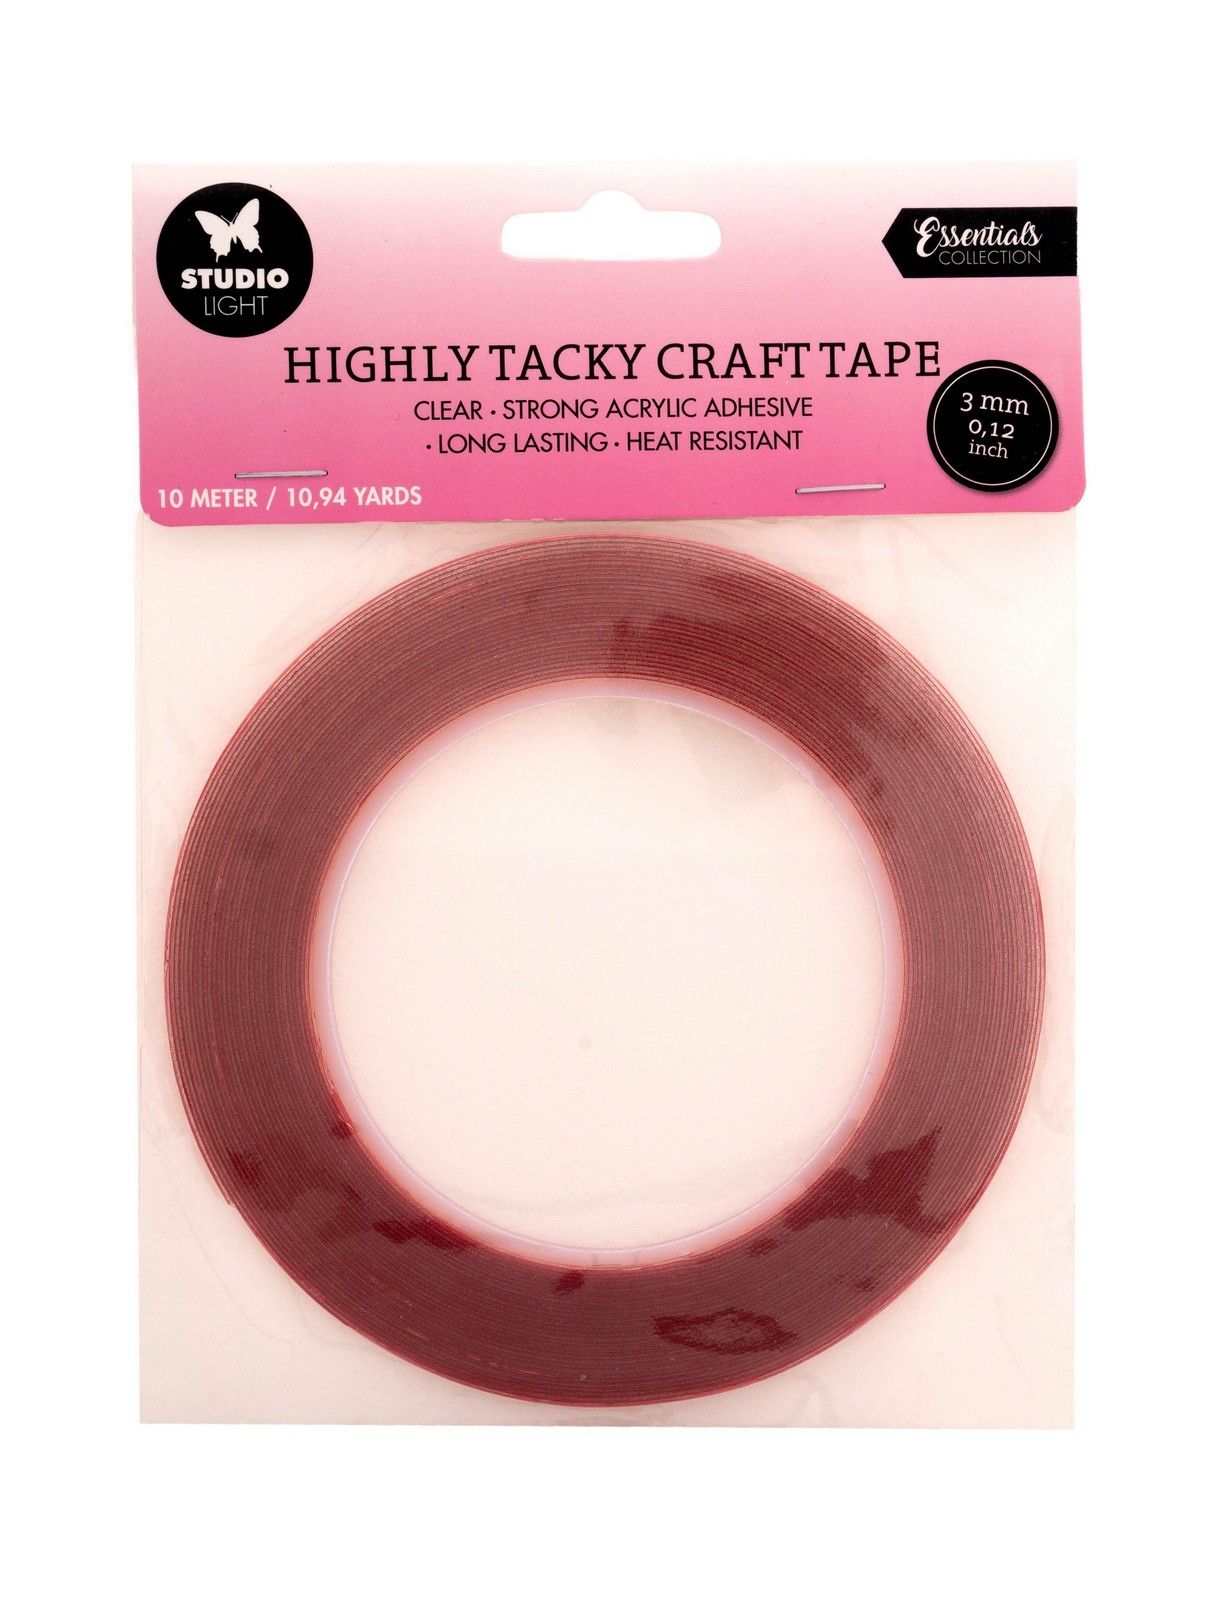 Studio Light • Essentials highly tacky doublesided craft tape 3mm